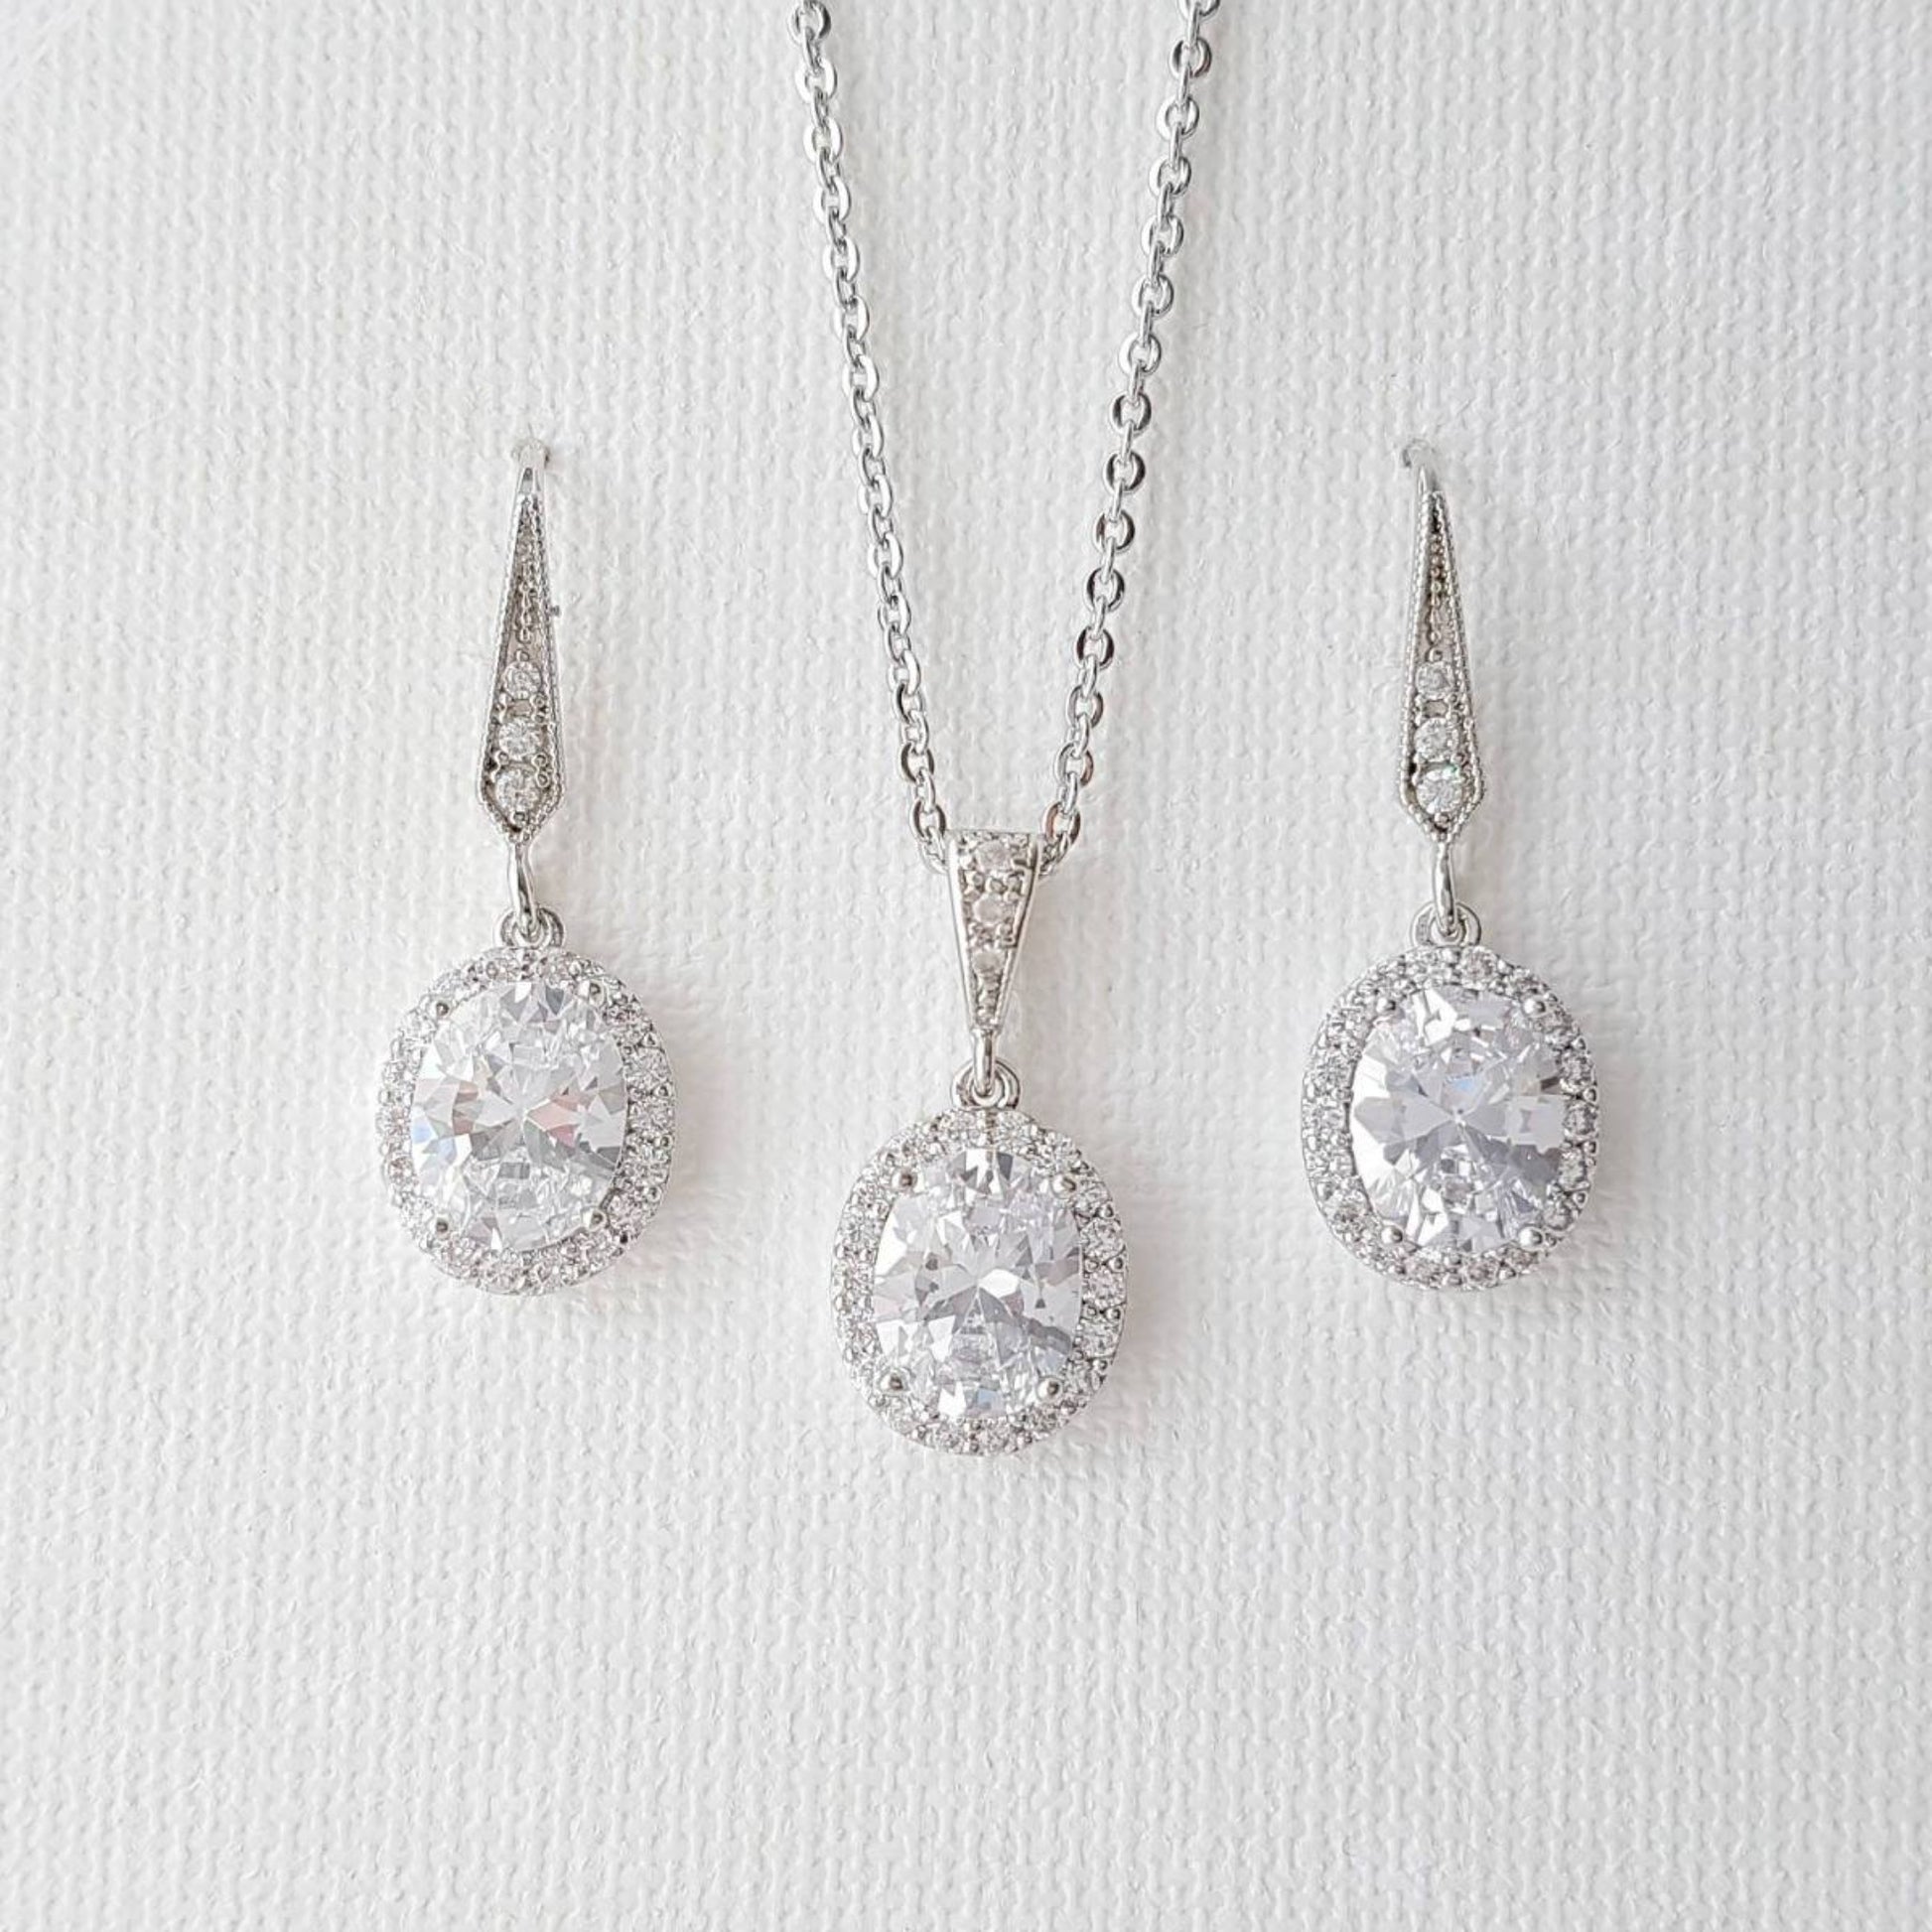 Bridesmaid Jewelry Set, Oval Bridal Set, Crystal Drop Earrings Necklace Set, Halo Style, Cubic Zirconia, Wedding Jewelry Set, Emily - PoetryDesigns